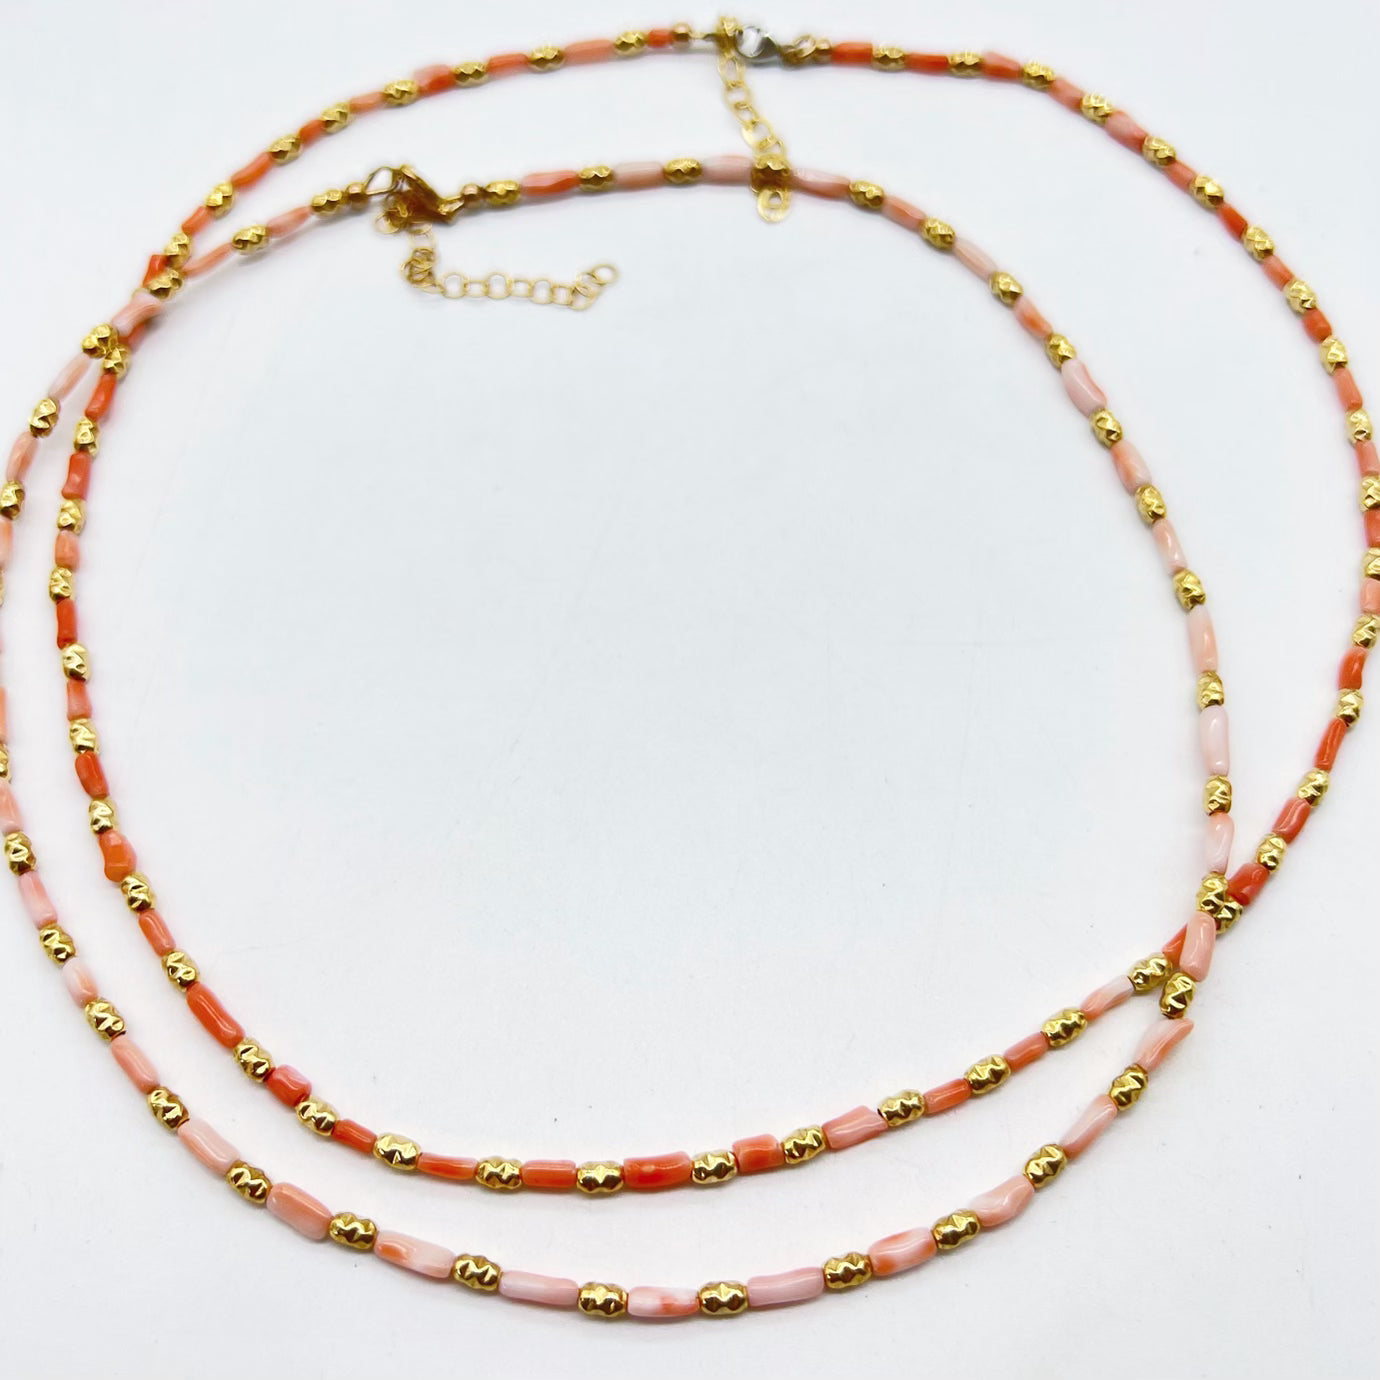 CORAL NECKLACE STACKER GIFT